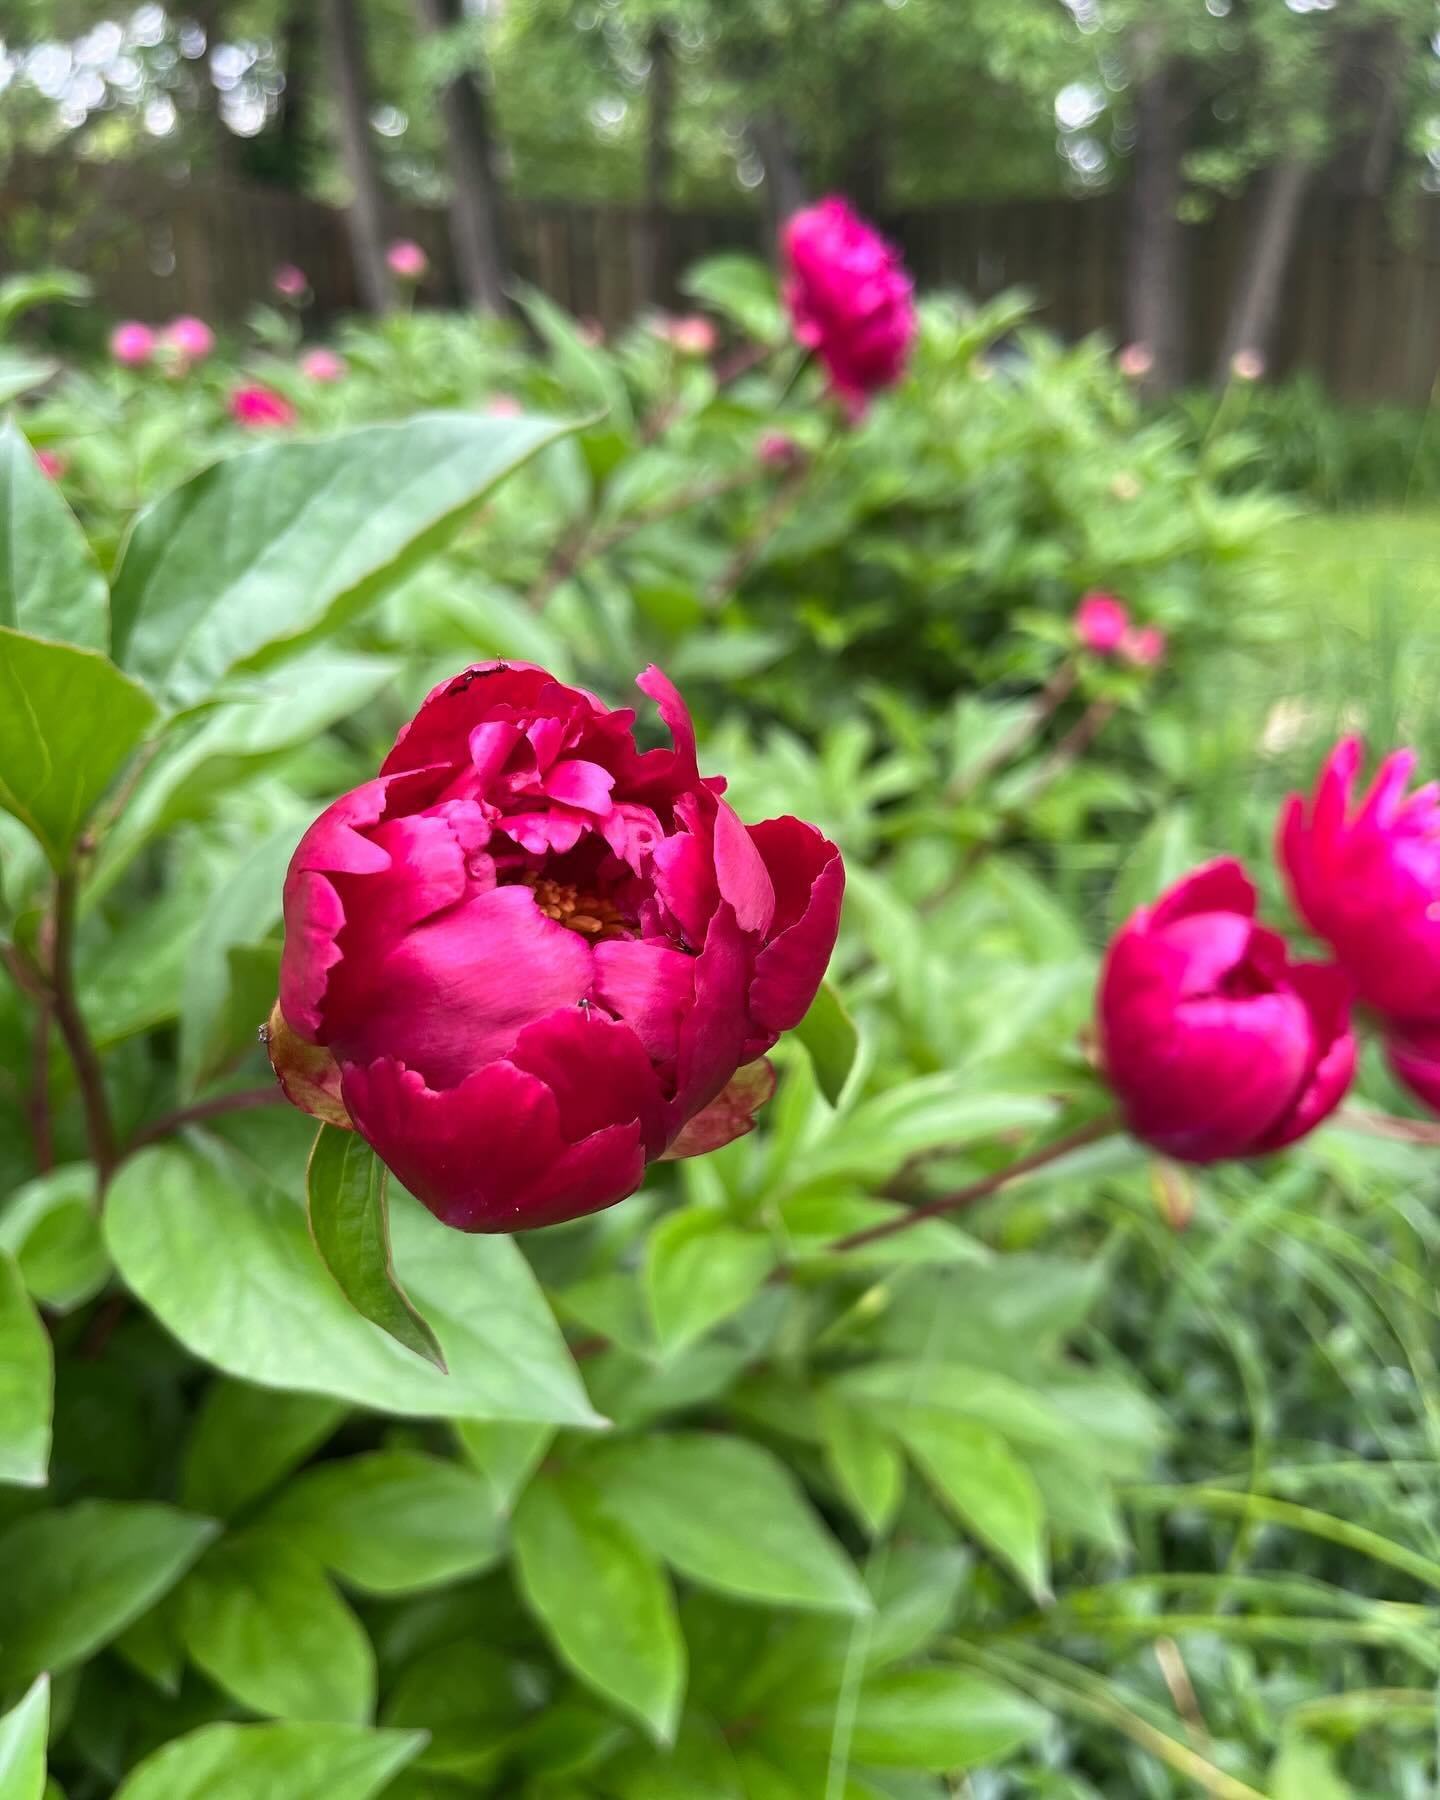 It&rsquo;s peony season, which, coincides with the end of the semester and just before my birthday. Busy days reading and commenting on student work + sorting out all tasks administrative before summer. These beauties are keeping me going&mdash;as ar